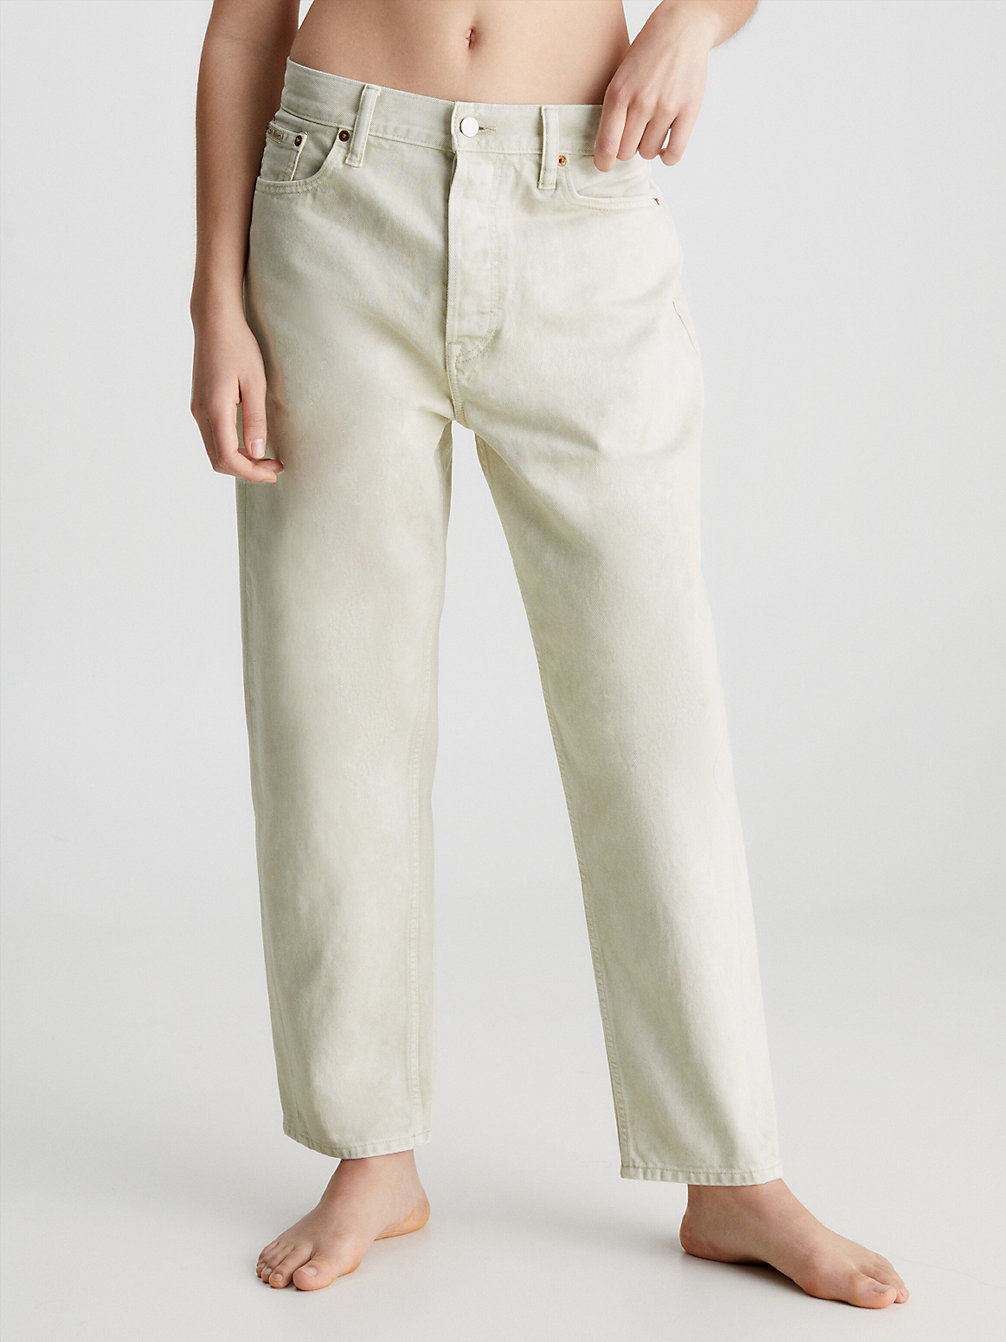 MARBLE UNBLEACHED > Unisex Relaxed Jeans - CK Standards > undefined heren - Calvin Klein